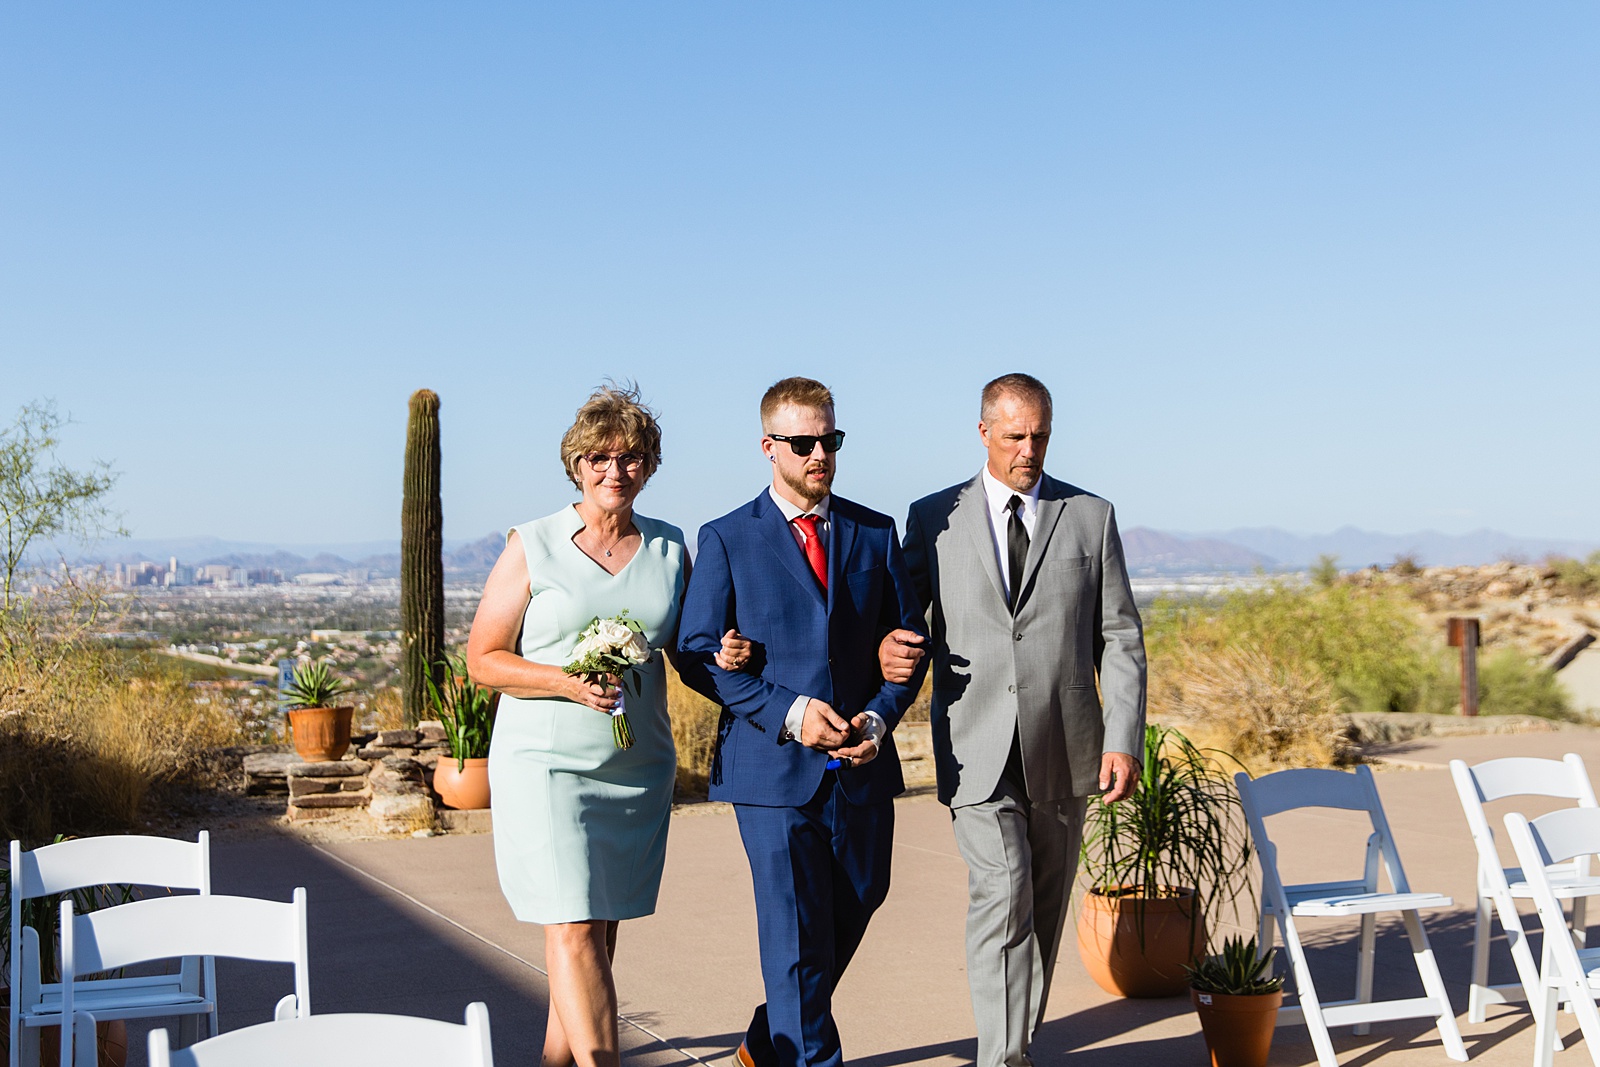 Groom walking down aisle during desert wedding ceremony by Phoenix wedding photographer Juniper and Co Photography.